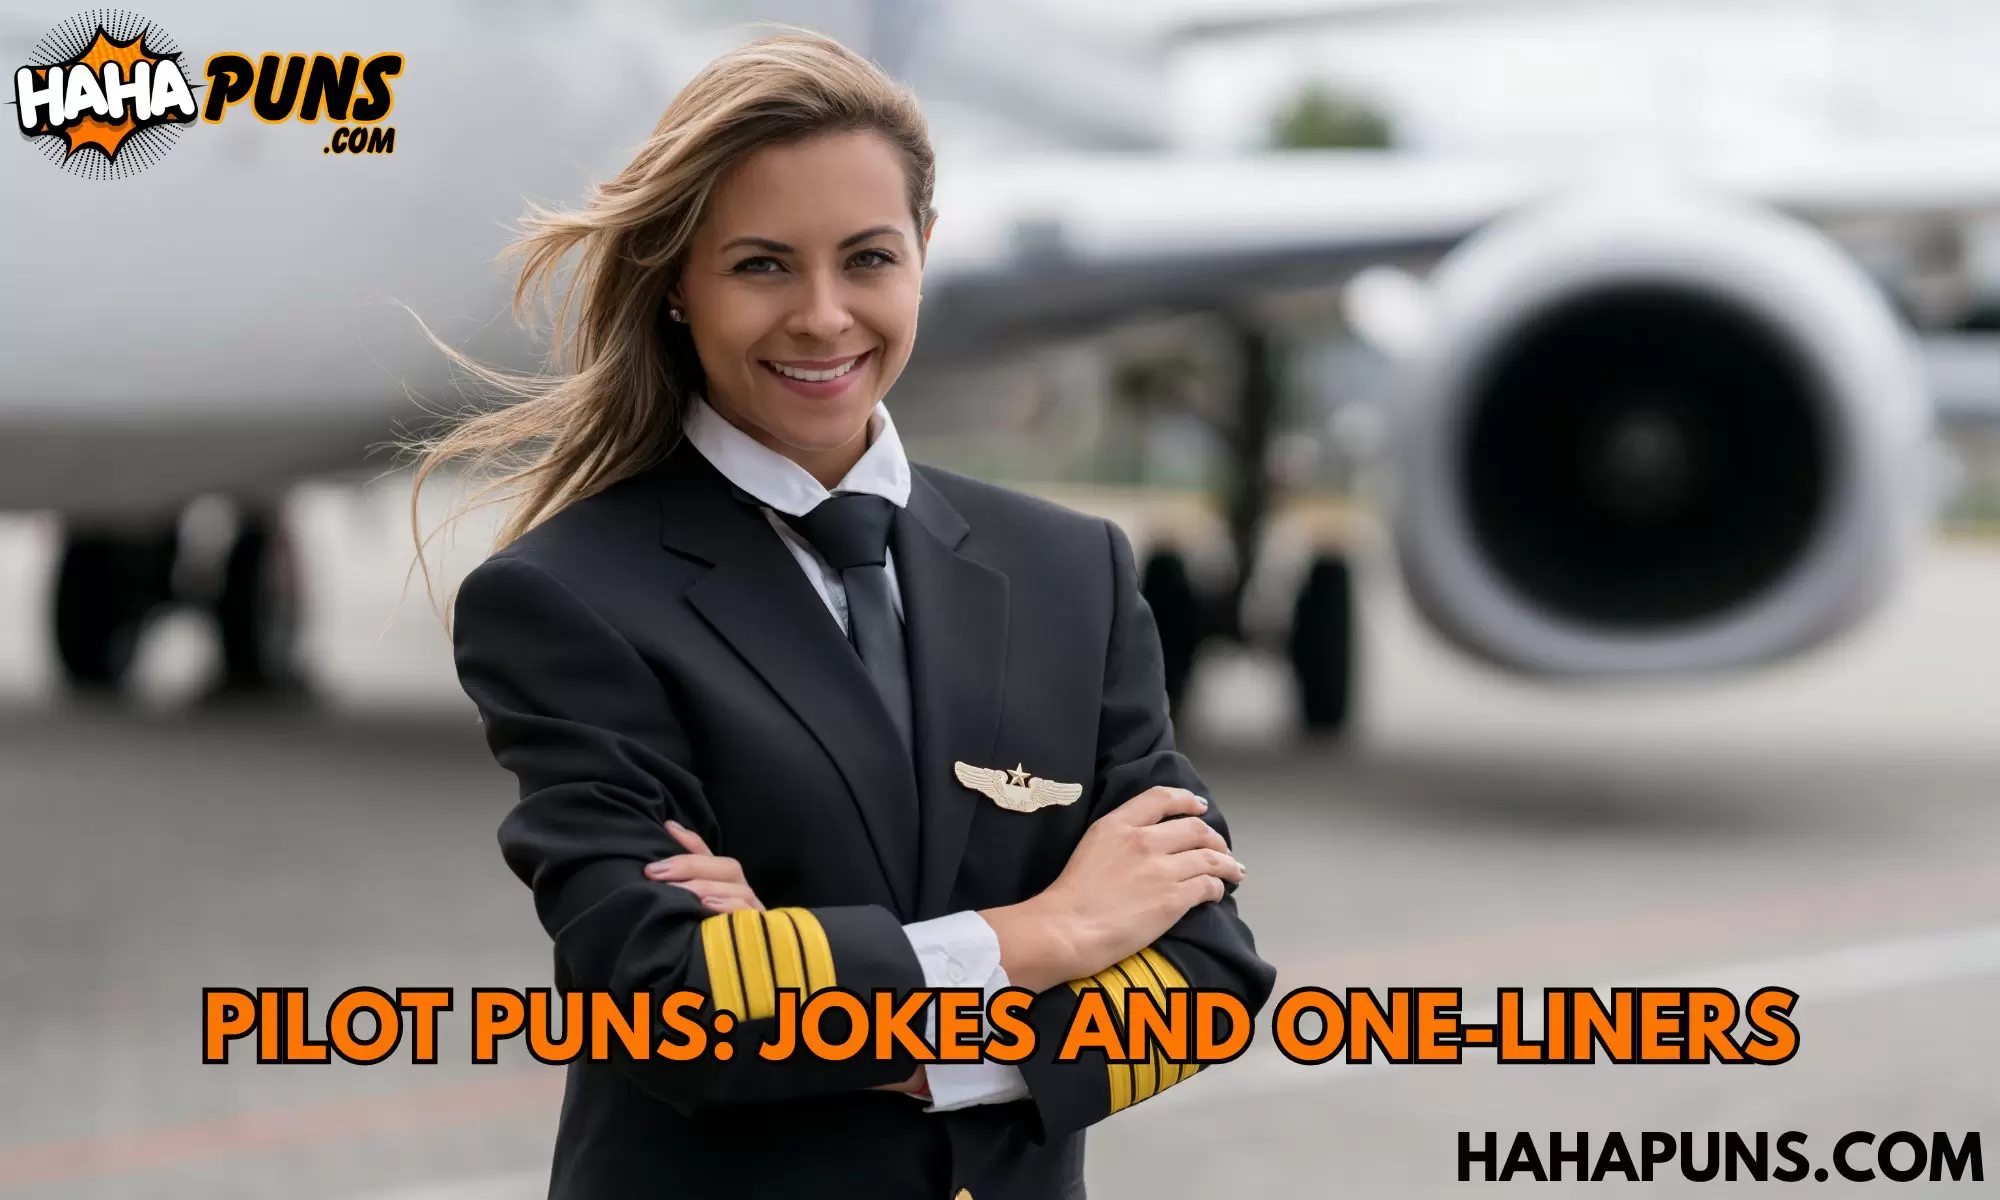 Pilot Puns: Jokes And One-Liners